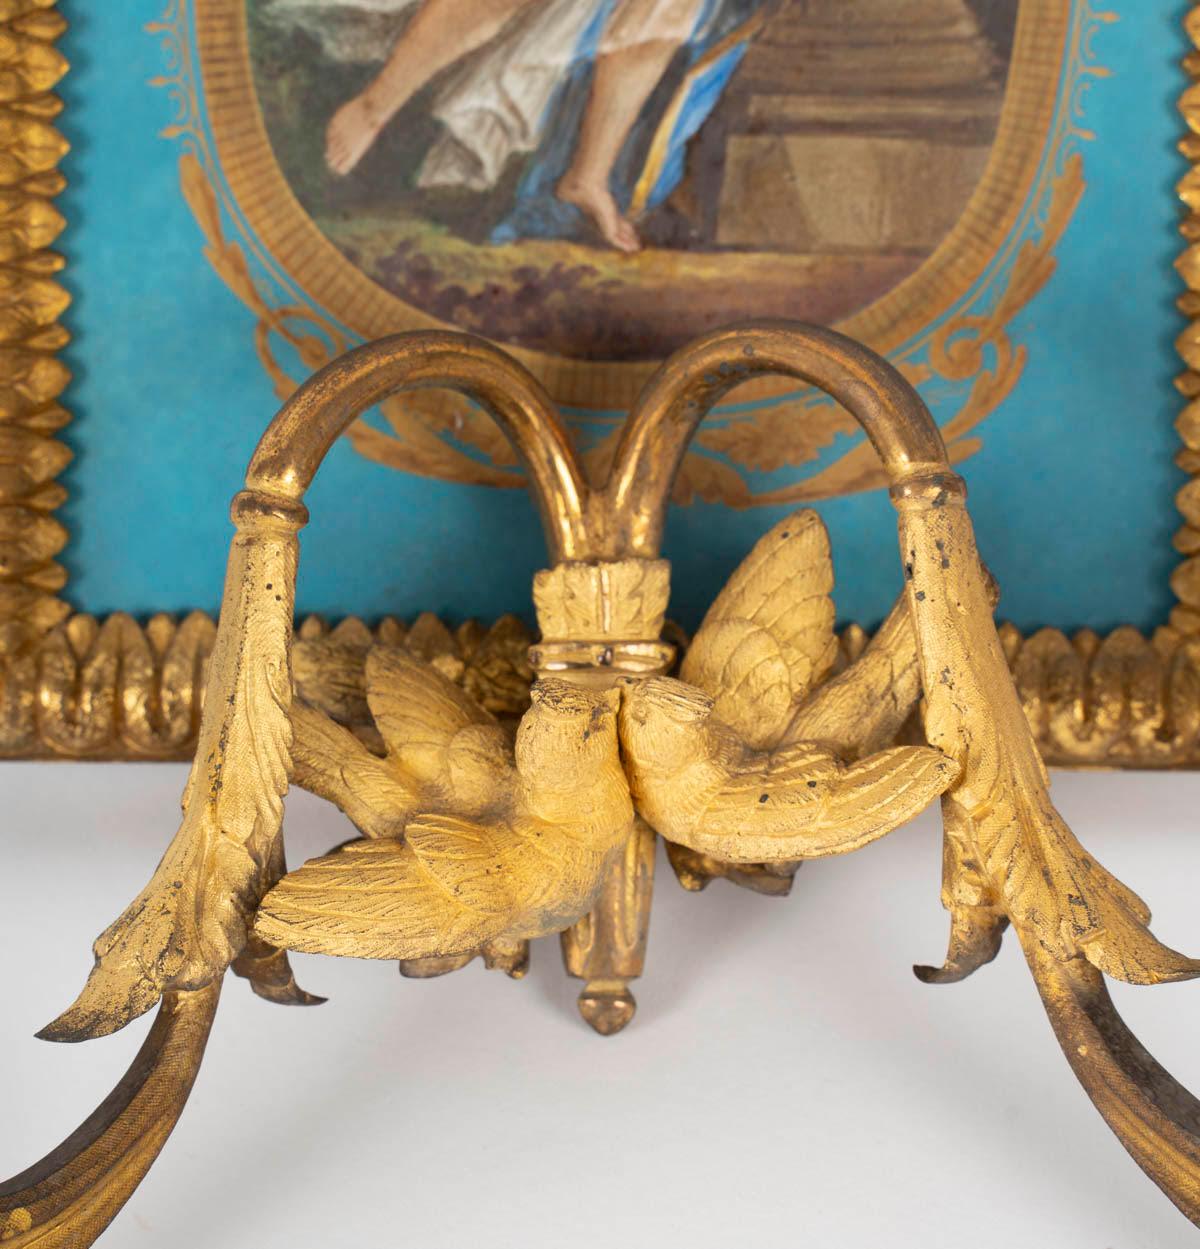 Napoleon III Pair of Wall Sconces in Gilt Bronze and Sèvres Porcelain, Napoleon Period.